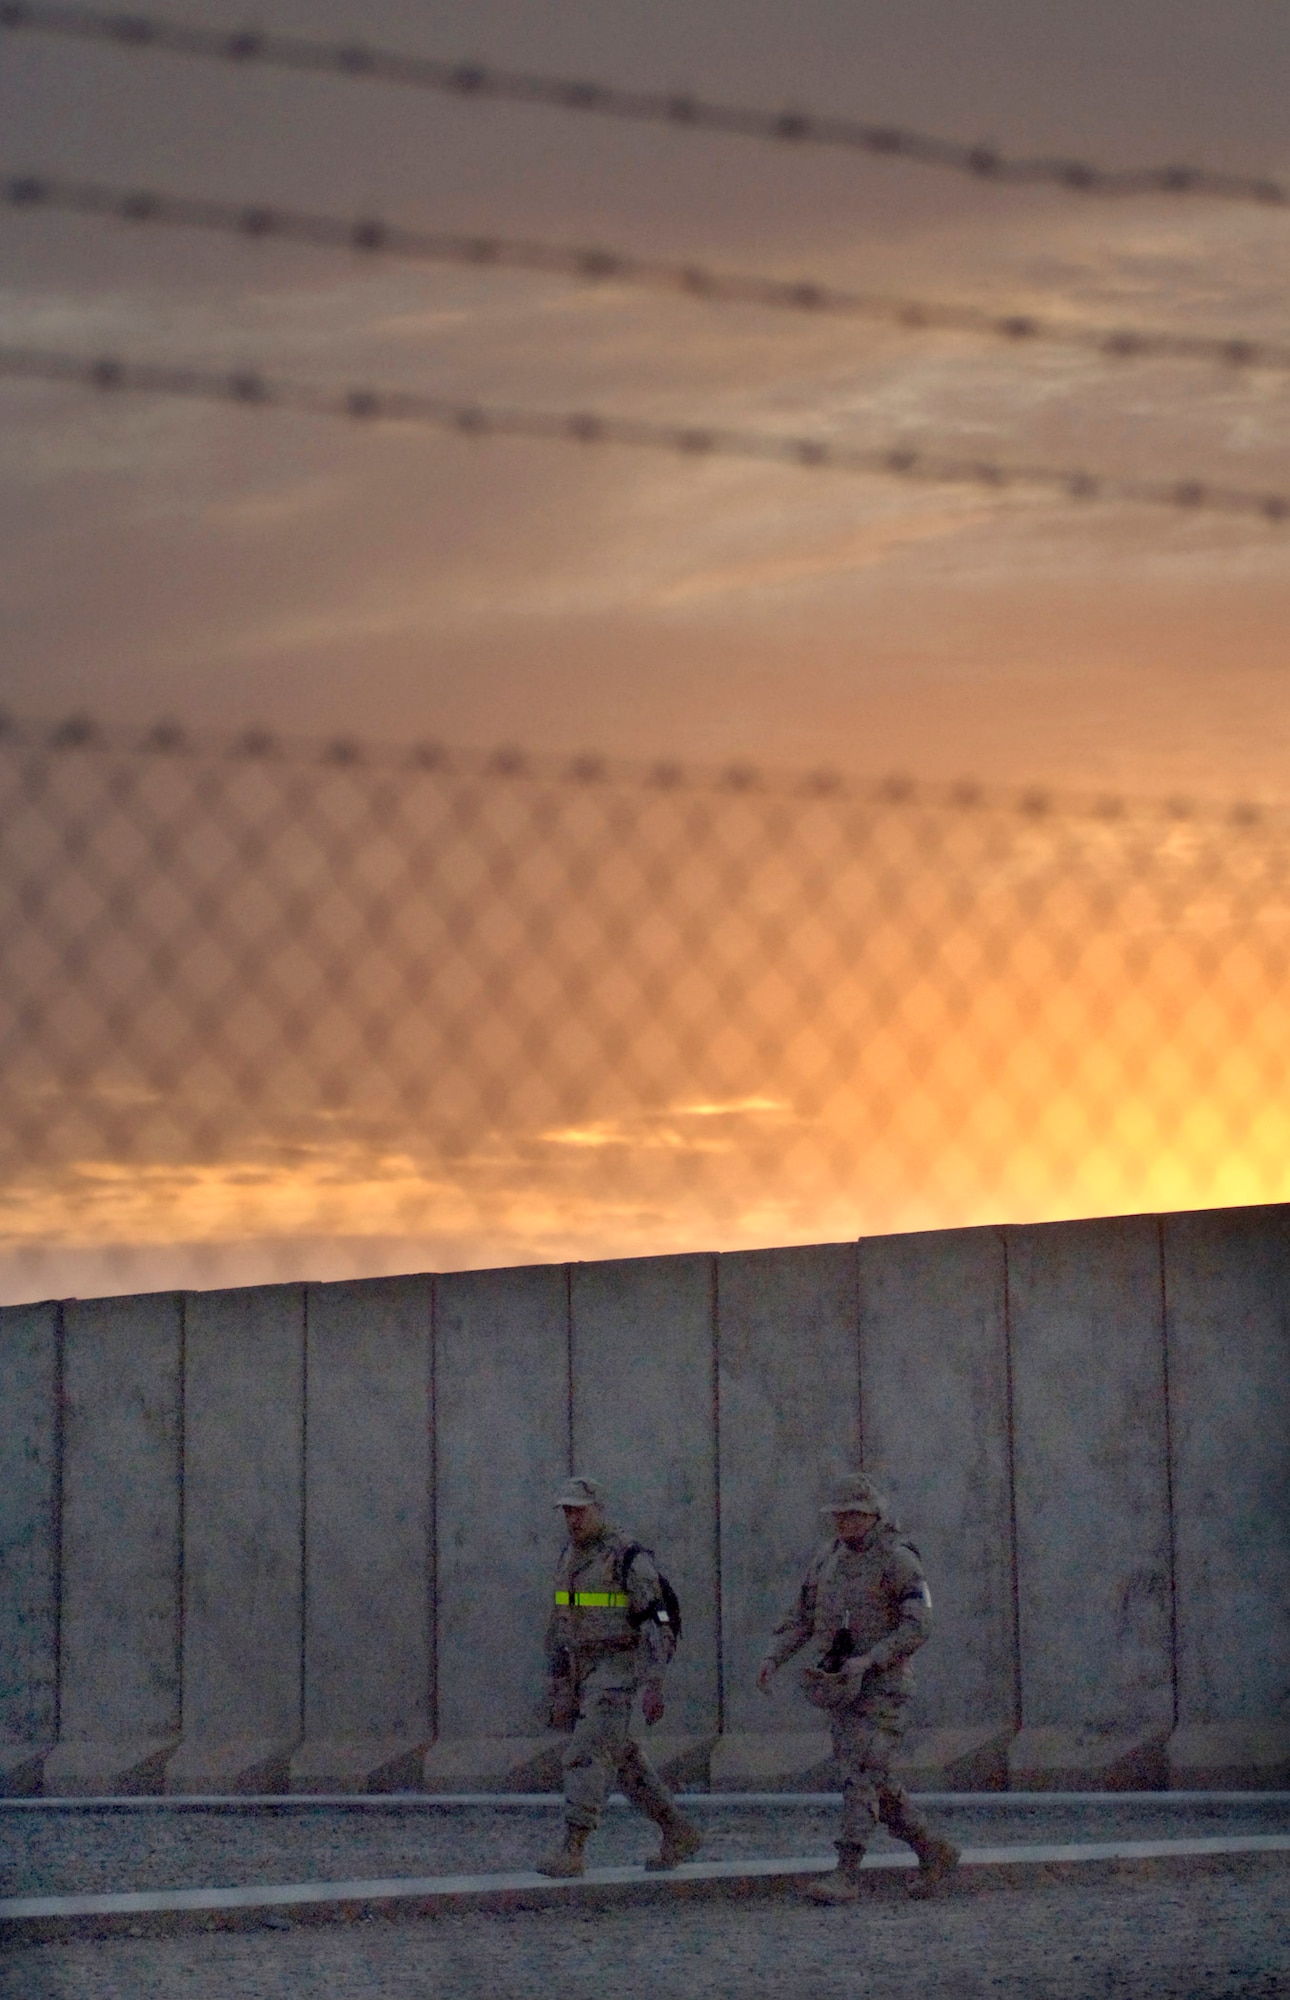 Airmen walk past a wall of T-barriers Feb. 21 after a long duty day at Balad Air Base, Iraq. Most Airmen assigned to the base live in a compound surrounded by towering T-barriers. They act as a line of defense against stray bullets and blast protection from mortar attacks. The weight of the T-barriers varies from four to 17 tons. The T-barriers' purpose is to protect all base facilities. This intricate network of pathways serves as a shield for more than 3,300 Airmen. (U.S. Air Force photo/Tech. Sgt. Cecilio M. Ricardo Jr.)